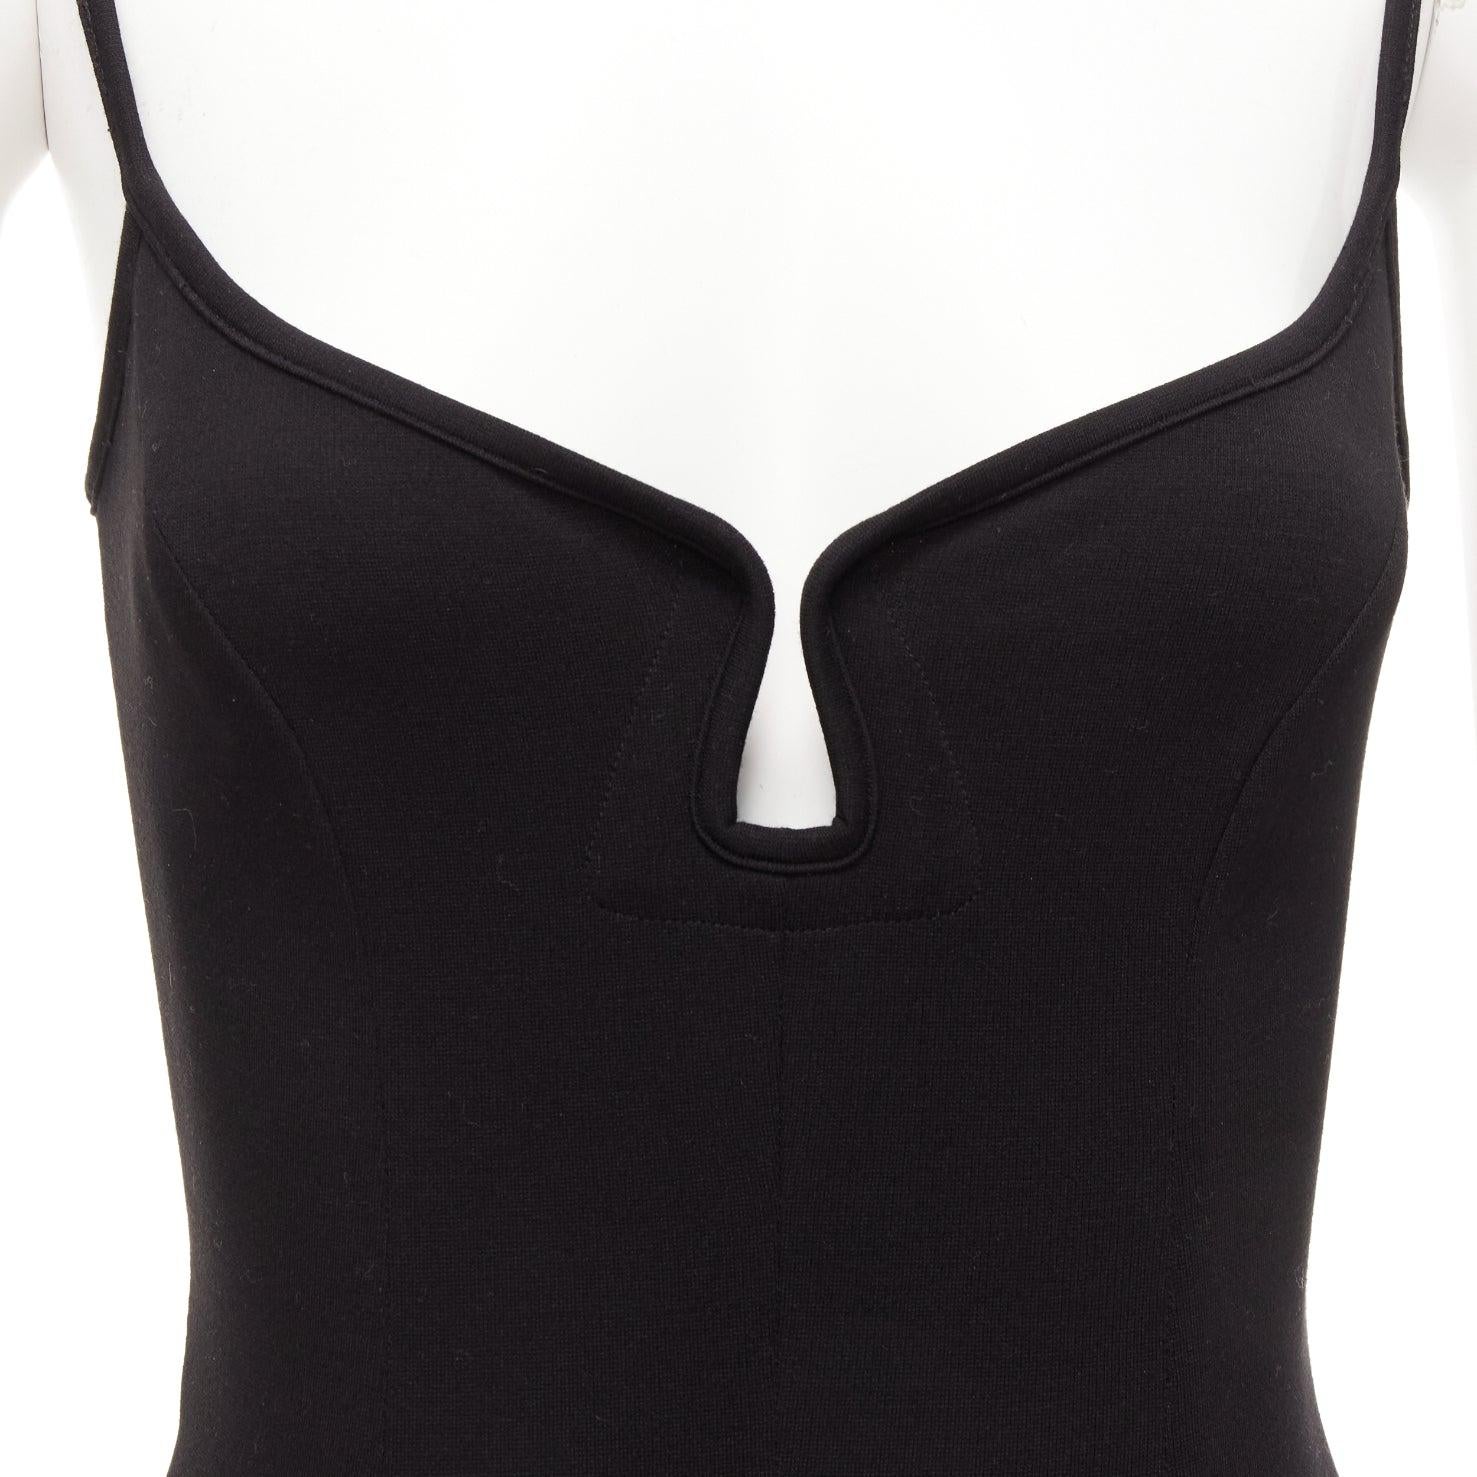 PARIS GEORGIA black sweetheart underwire neckline skinny jumpsuit US0 XS
Reference: LNKO/A02397
Brand: Paris Georgia
Material: Viscose, Blend
Color: Black
Pattern: Solid
Closure: Zip
Lining: Black Fabric
Extra Details: Side zip. Made in New